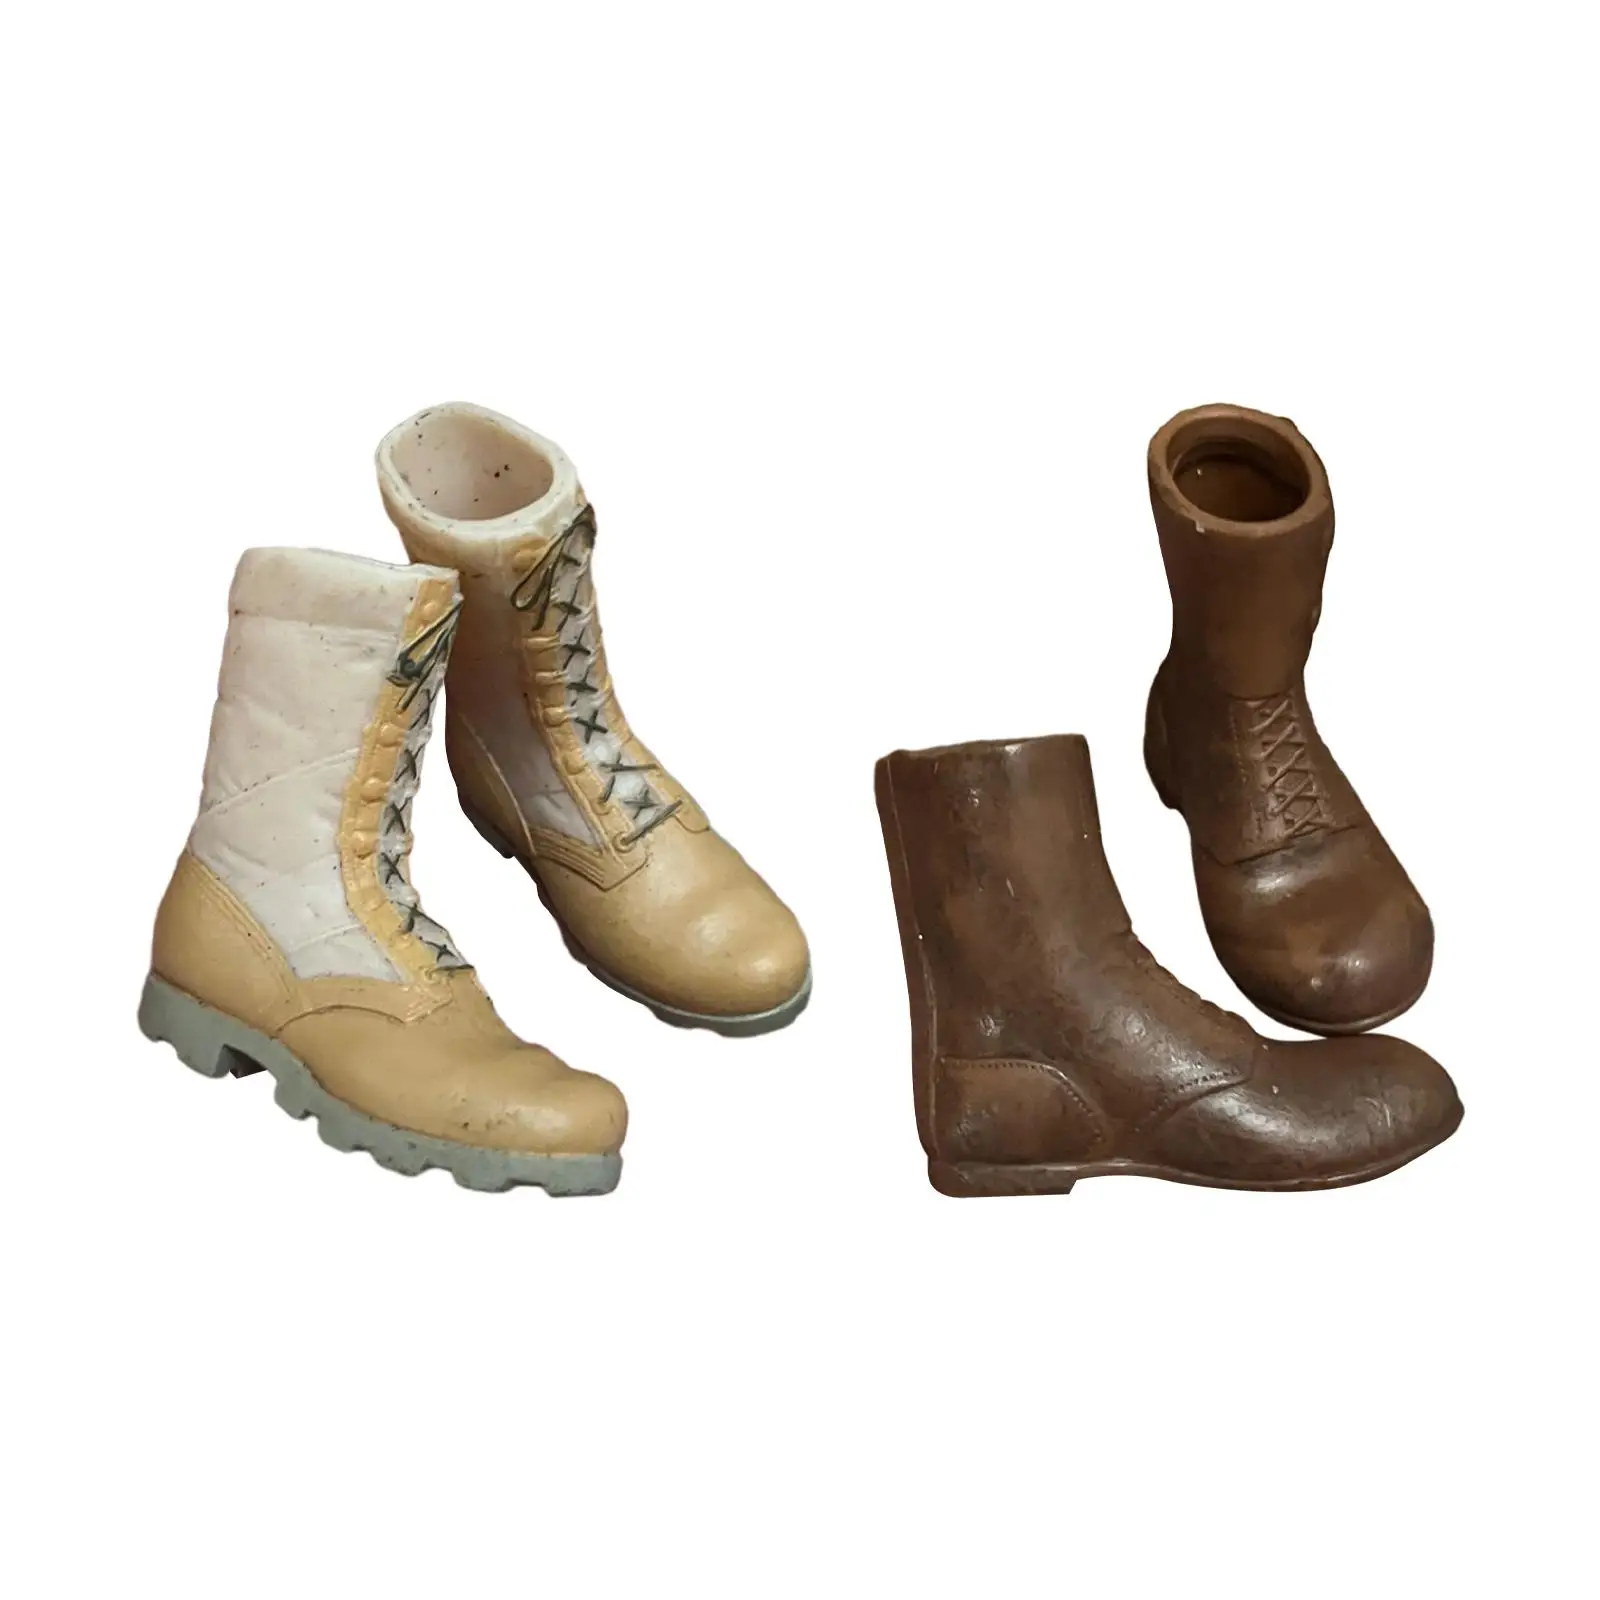 1:6 Scale Soldier Shoes Casual Work Boot Footwear Round Toe Boot Formal Fashion Classic for 12`` Male Dolls Accessories